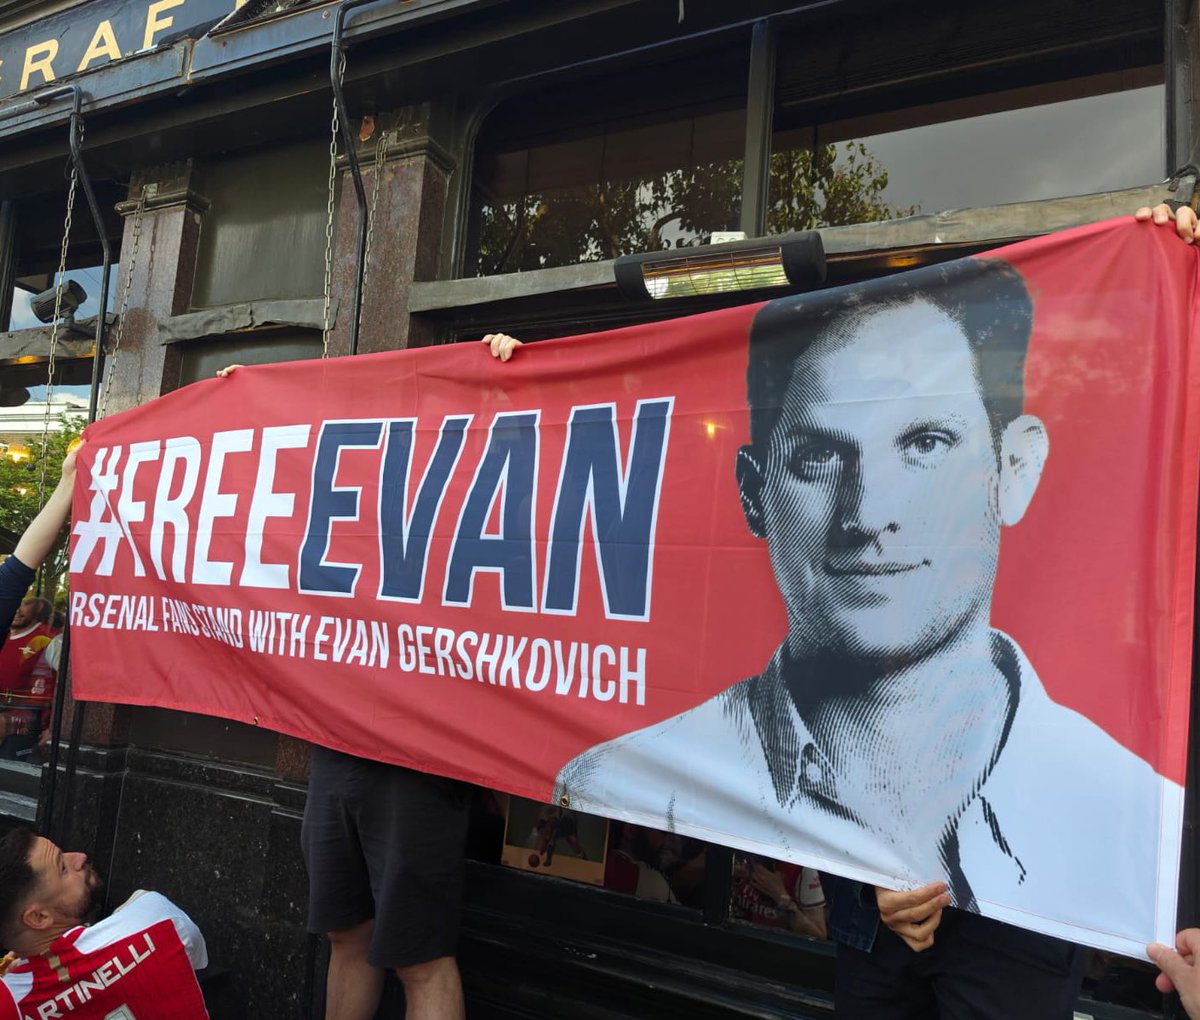 Not everyone can be here today. #FreeEvan